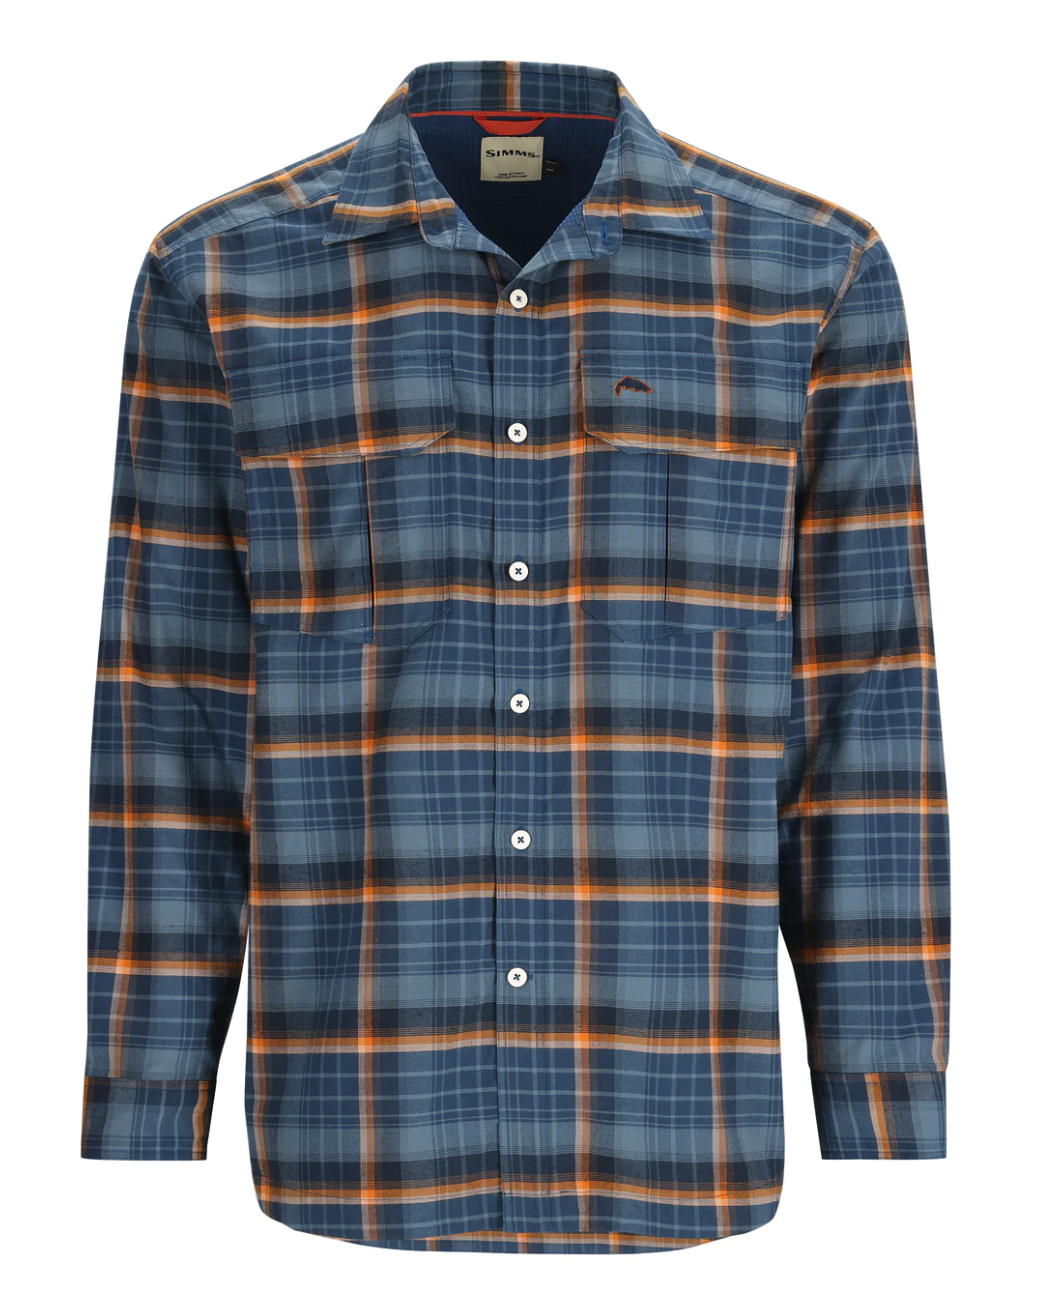 In stock Simms ColdWeather Shirt is a best flannel fishing shirt for sale.